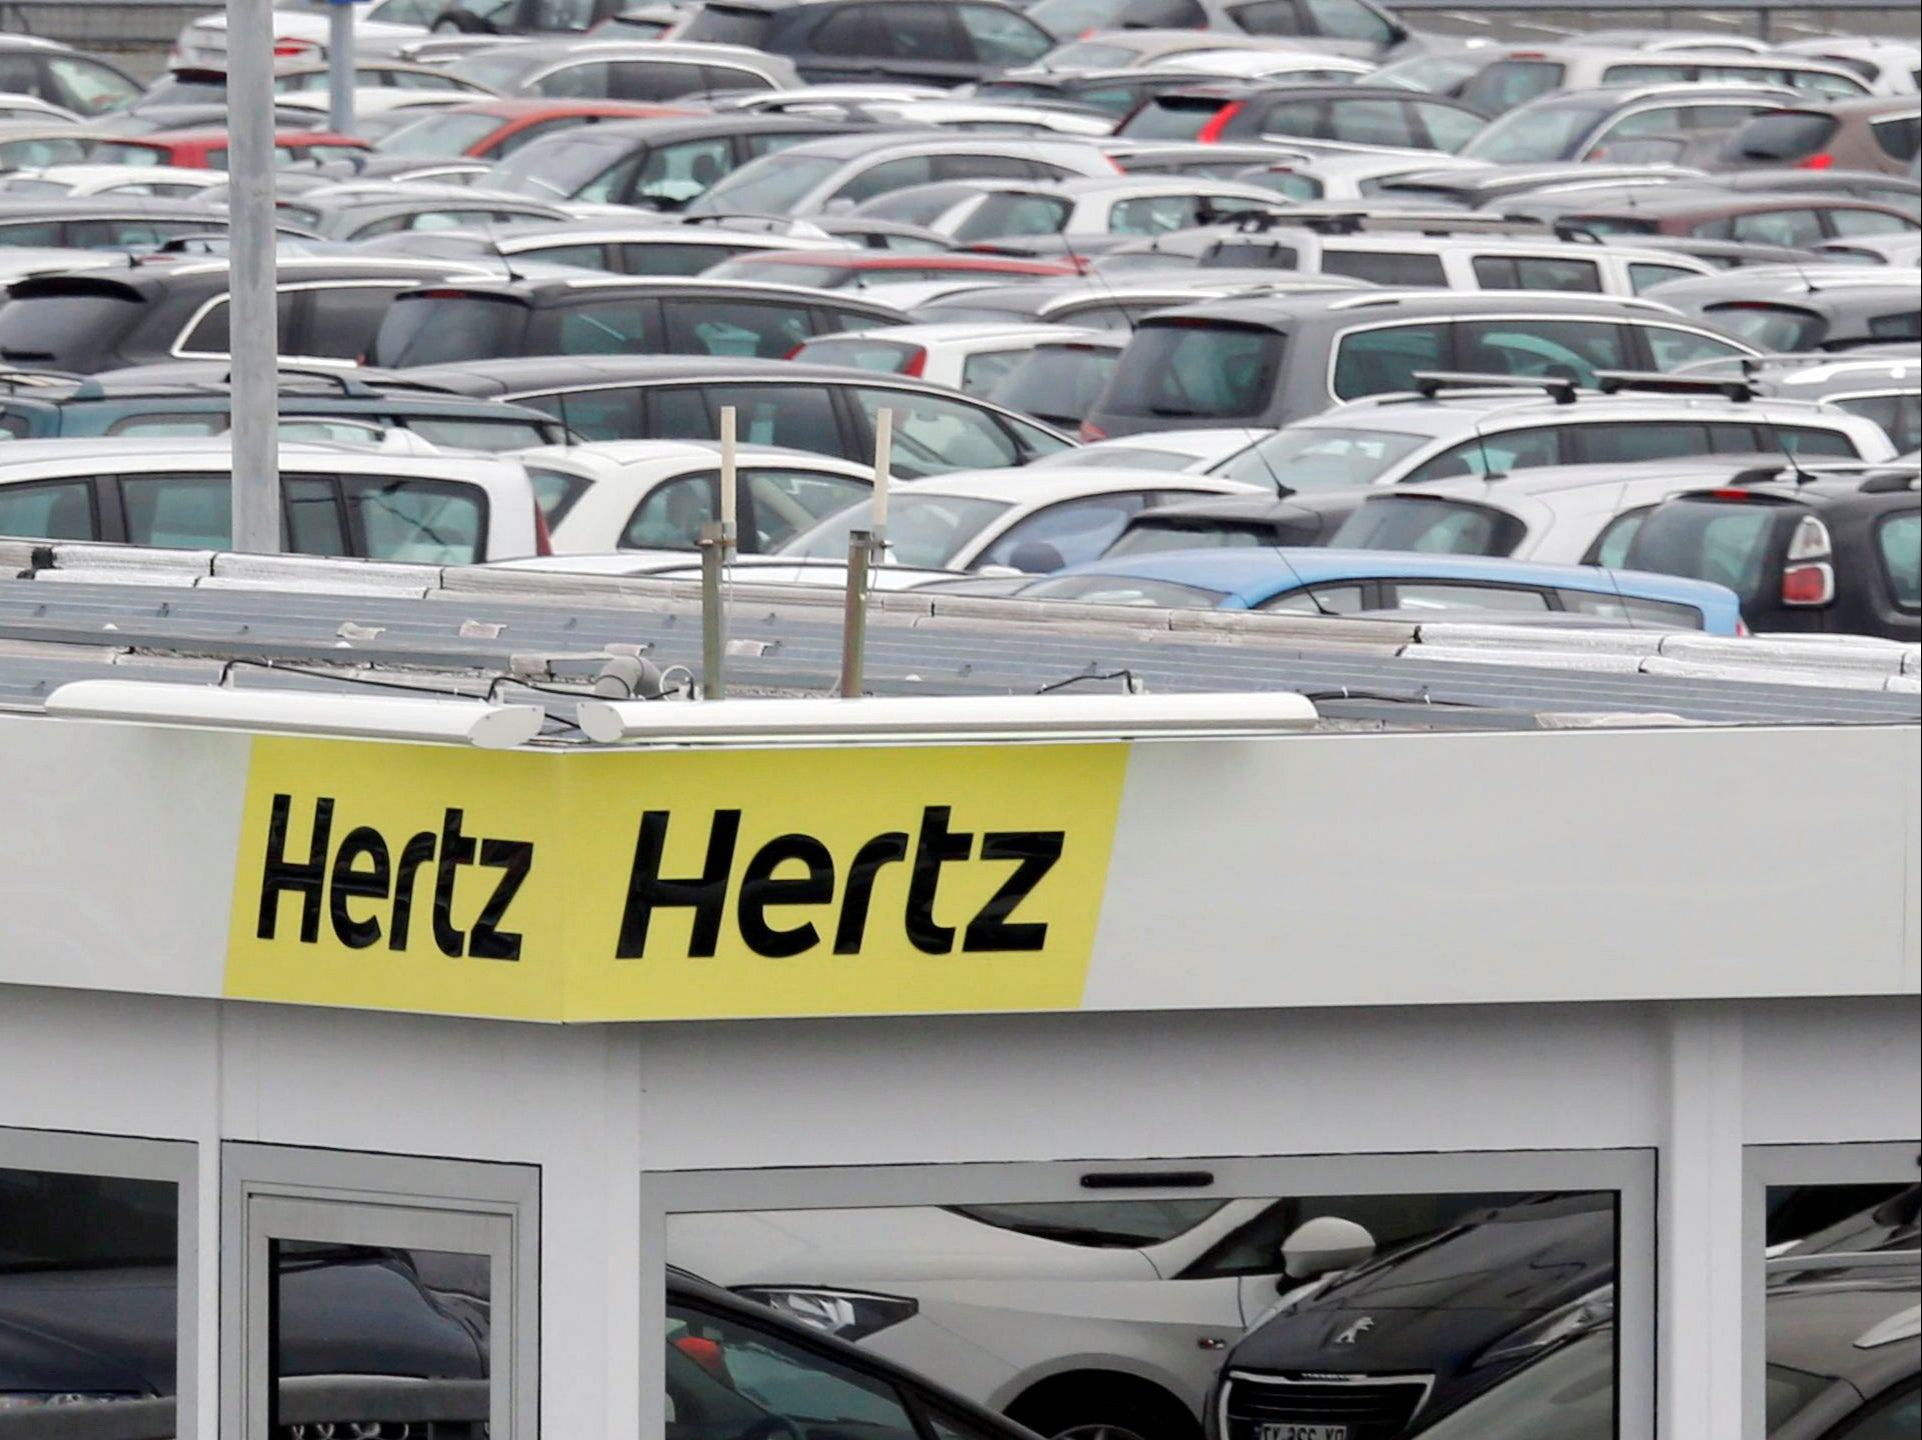 The company filed for bankruptcy in 2020 as car rentals tanked